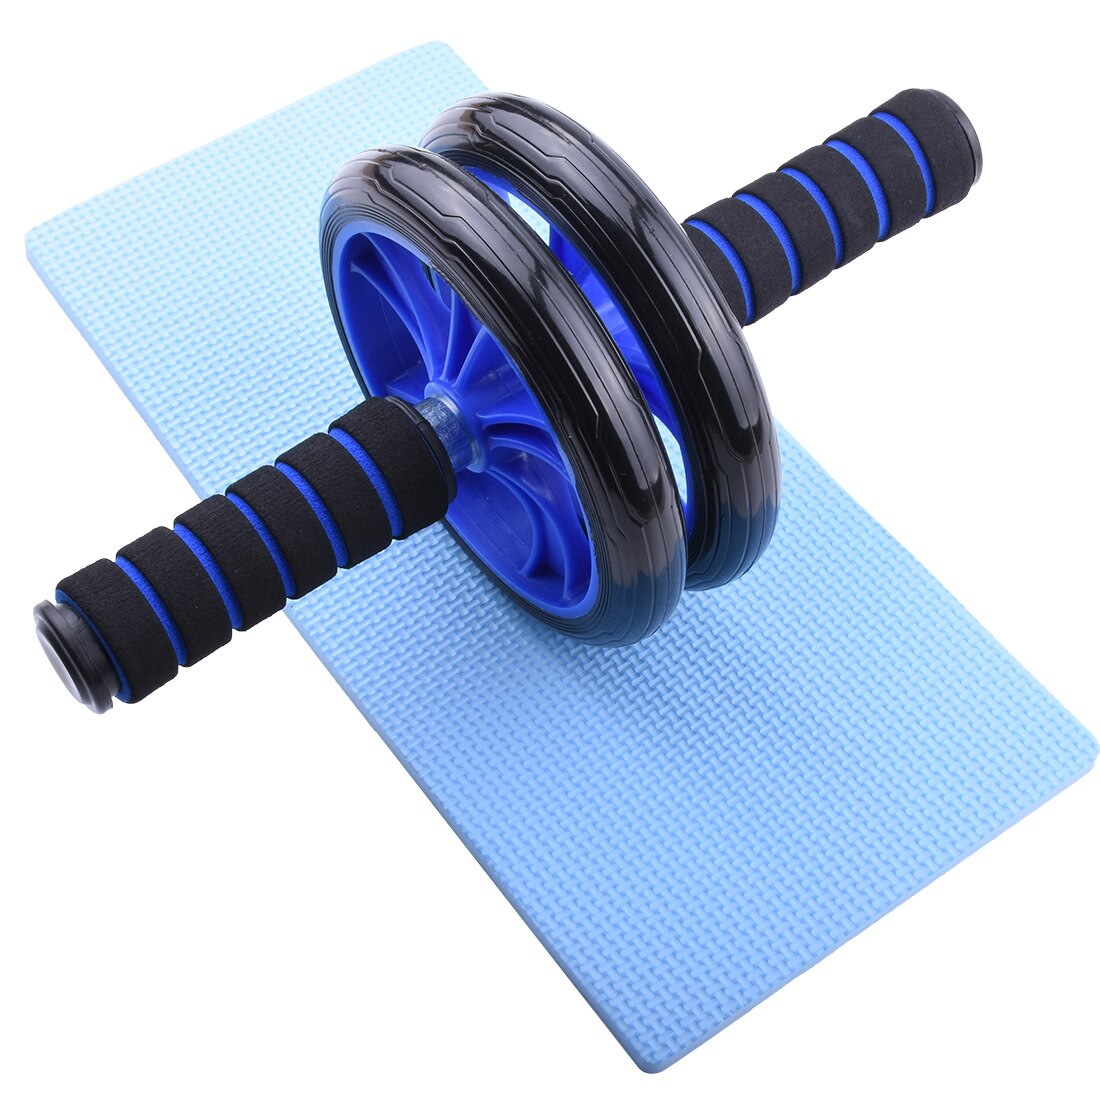 AB Roller Wheel Abdominal Exercise Jump Rope Push up Rack Resistance Bands Muscle Trainer Fitness Home Gym Workout Equipment